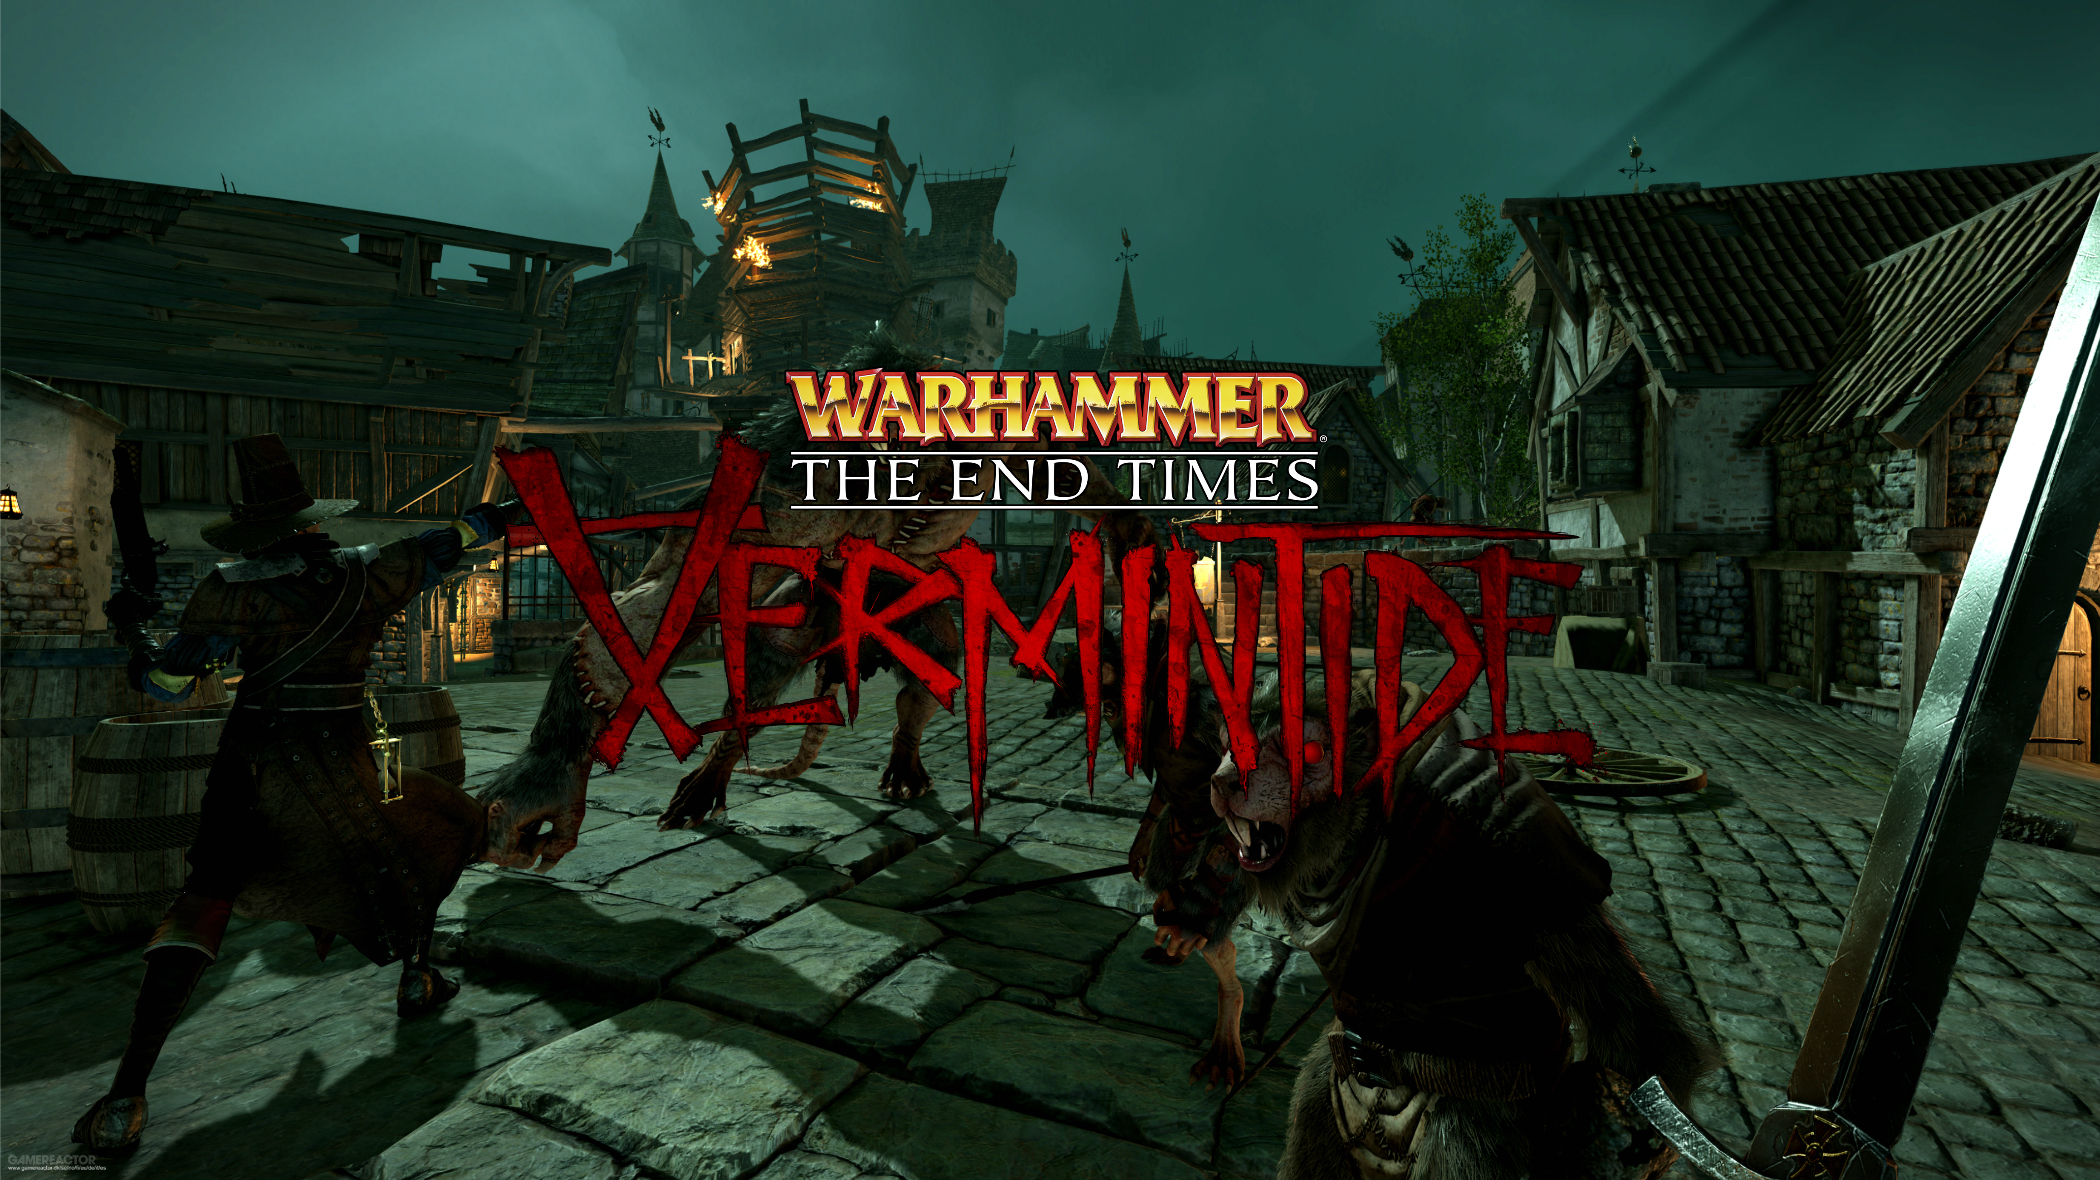 When the game ends. Warhammer: end times - Vermintide. Warhammer end times - Vermintide Wallpaper. Warhammer: end times — Vermintide Raft. Обои на рабочий стол Vermintide.